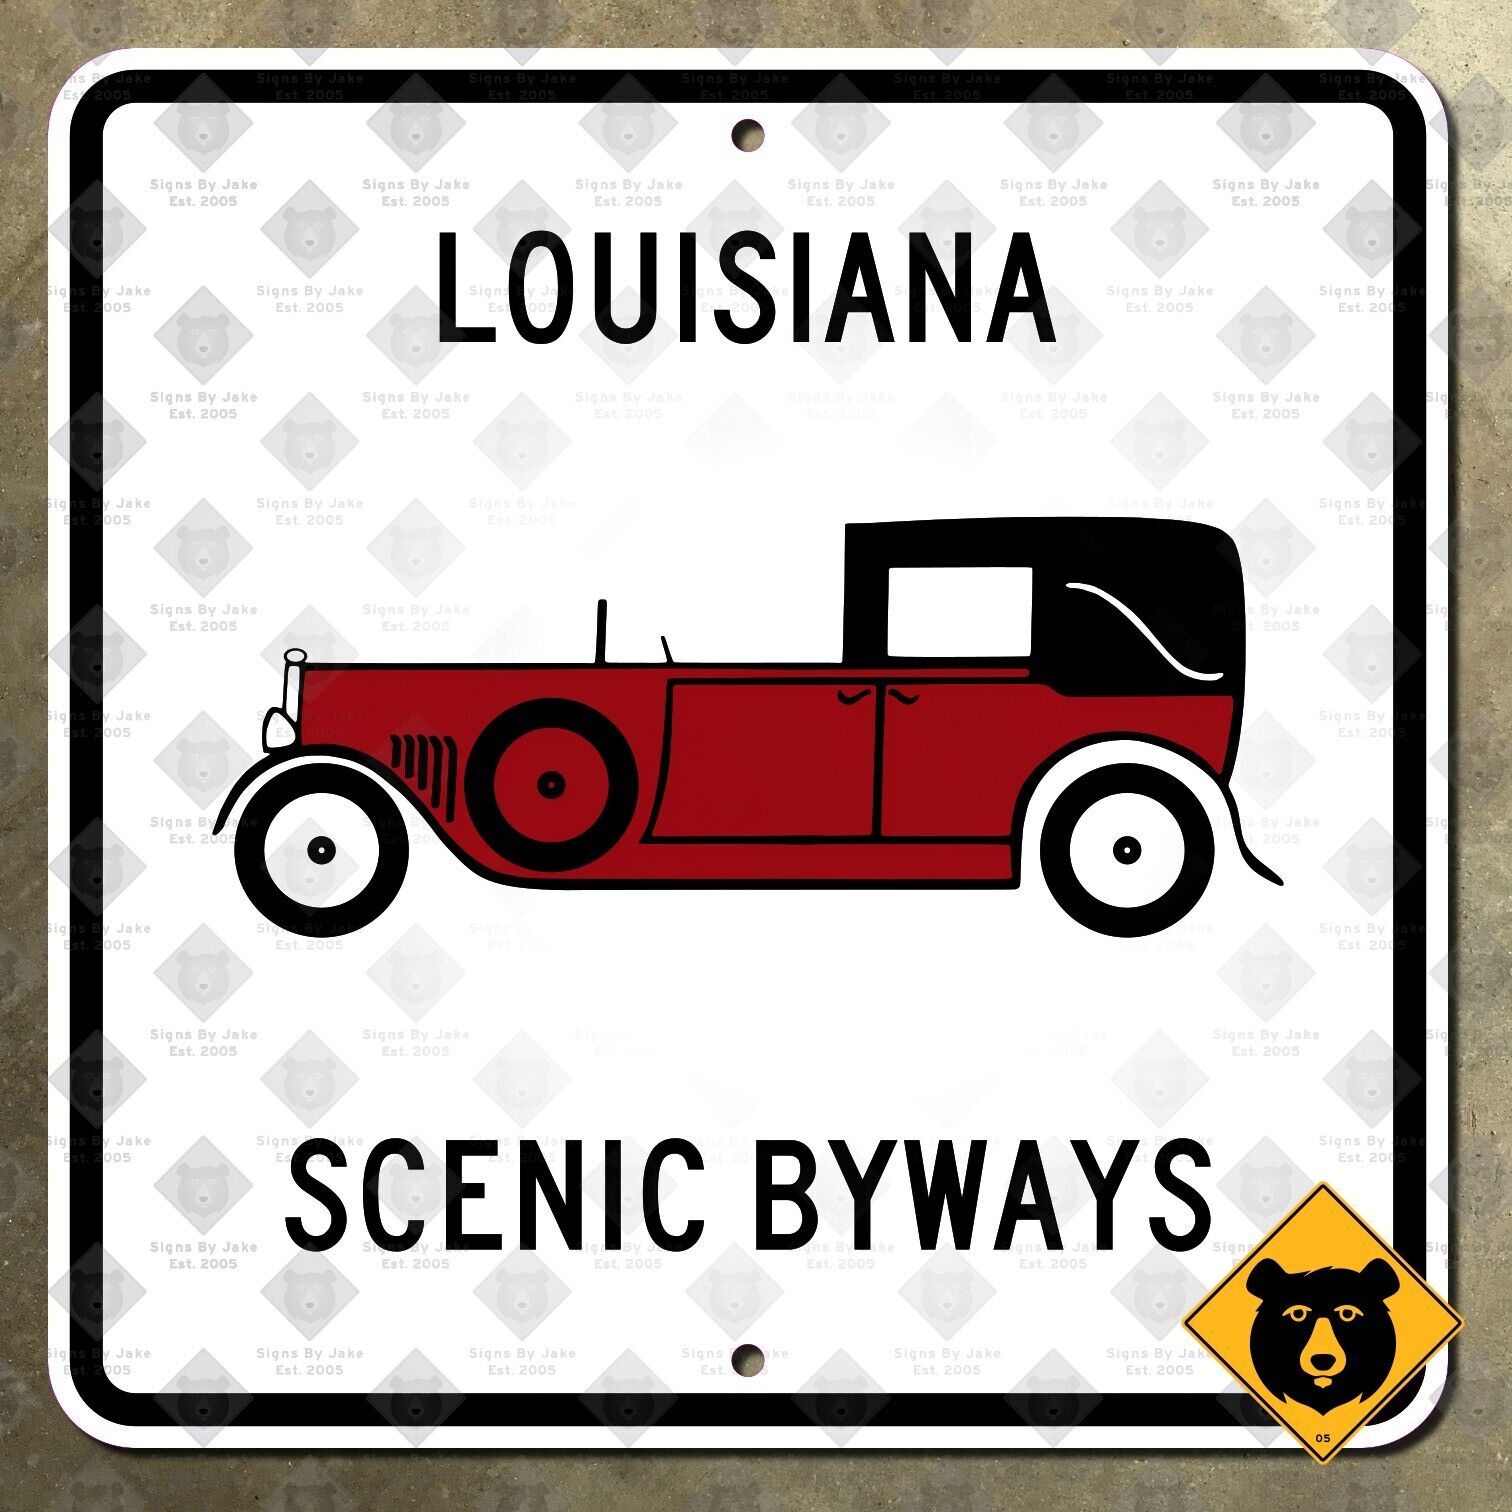 Louisiana Scenic Byways classic car highway marker 1993 road guide sign 16x16